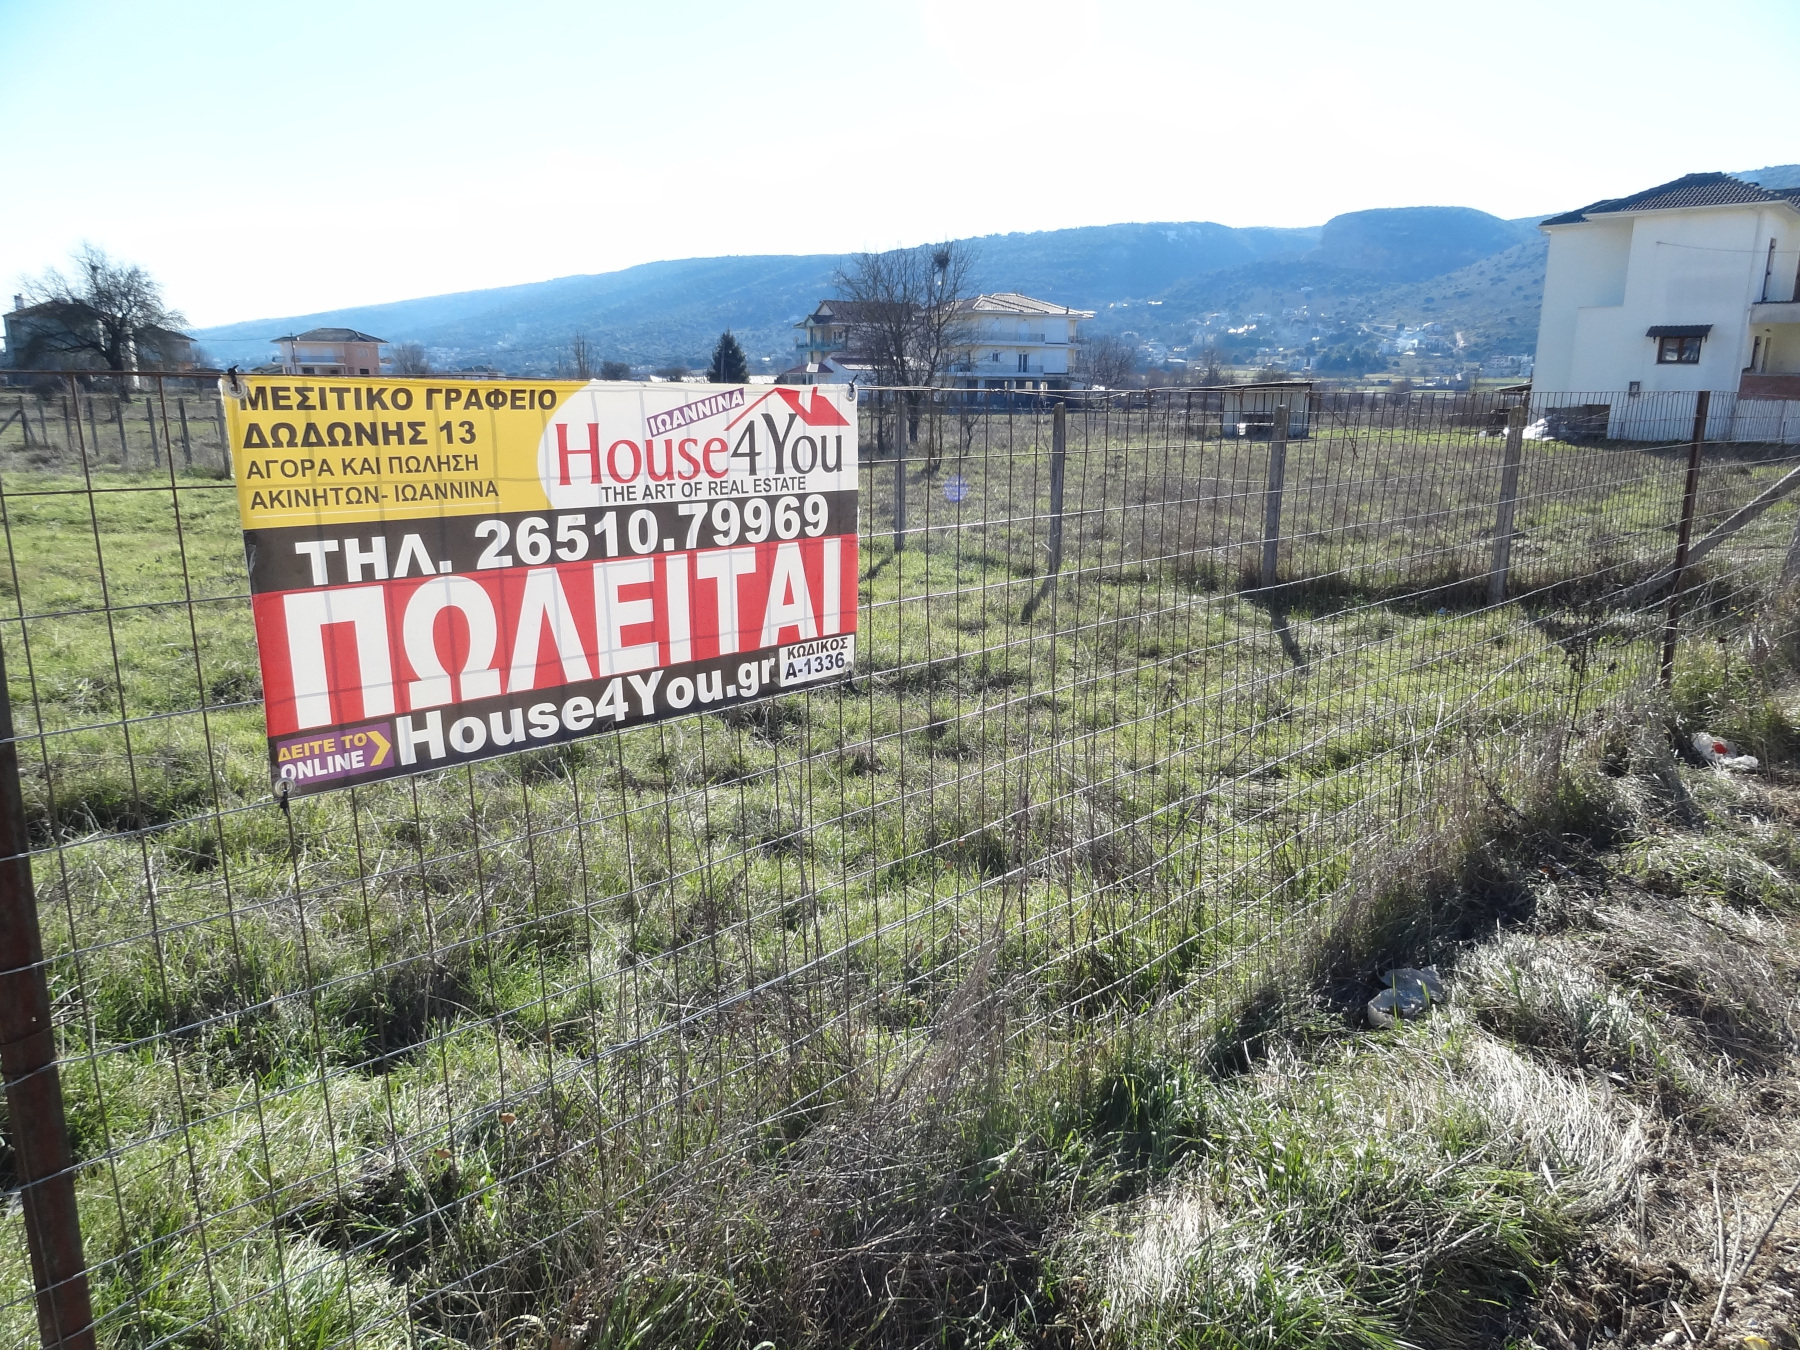 For sale a plot of 744 sq.m. with S.D. 0.5 in Kardamitsia, Ioannina on Olympiados Street